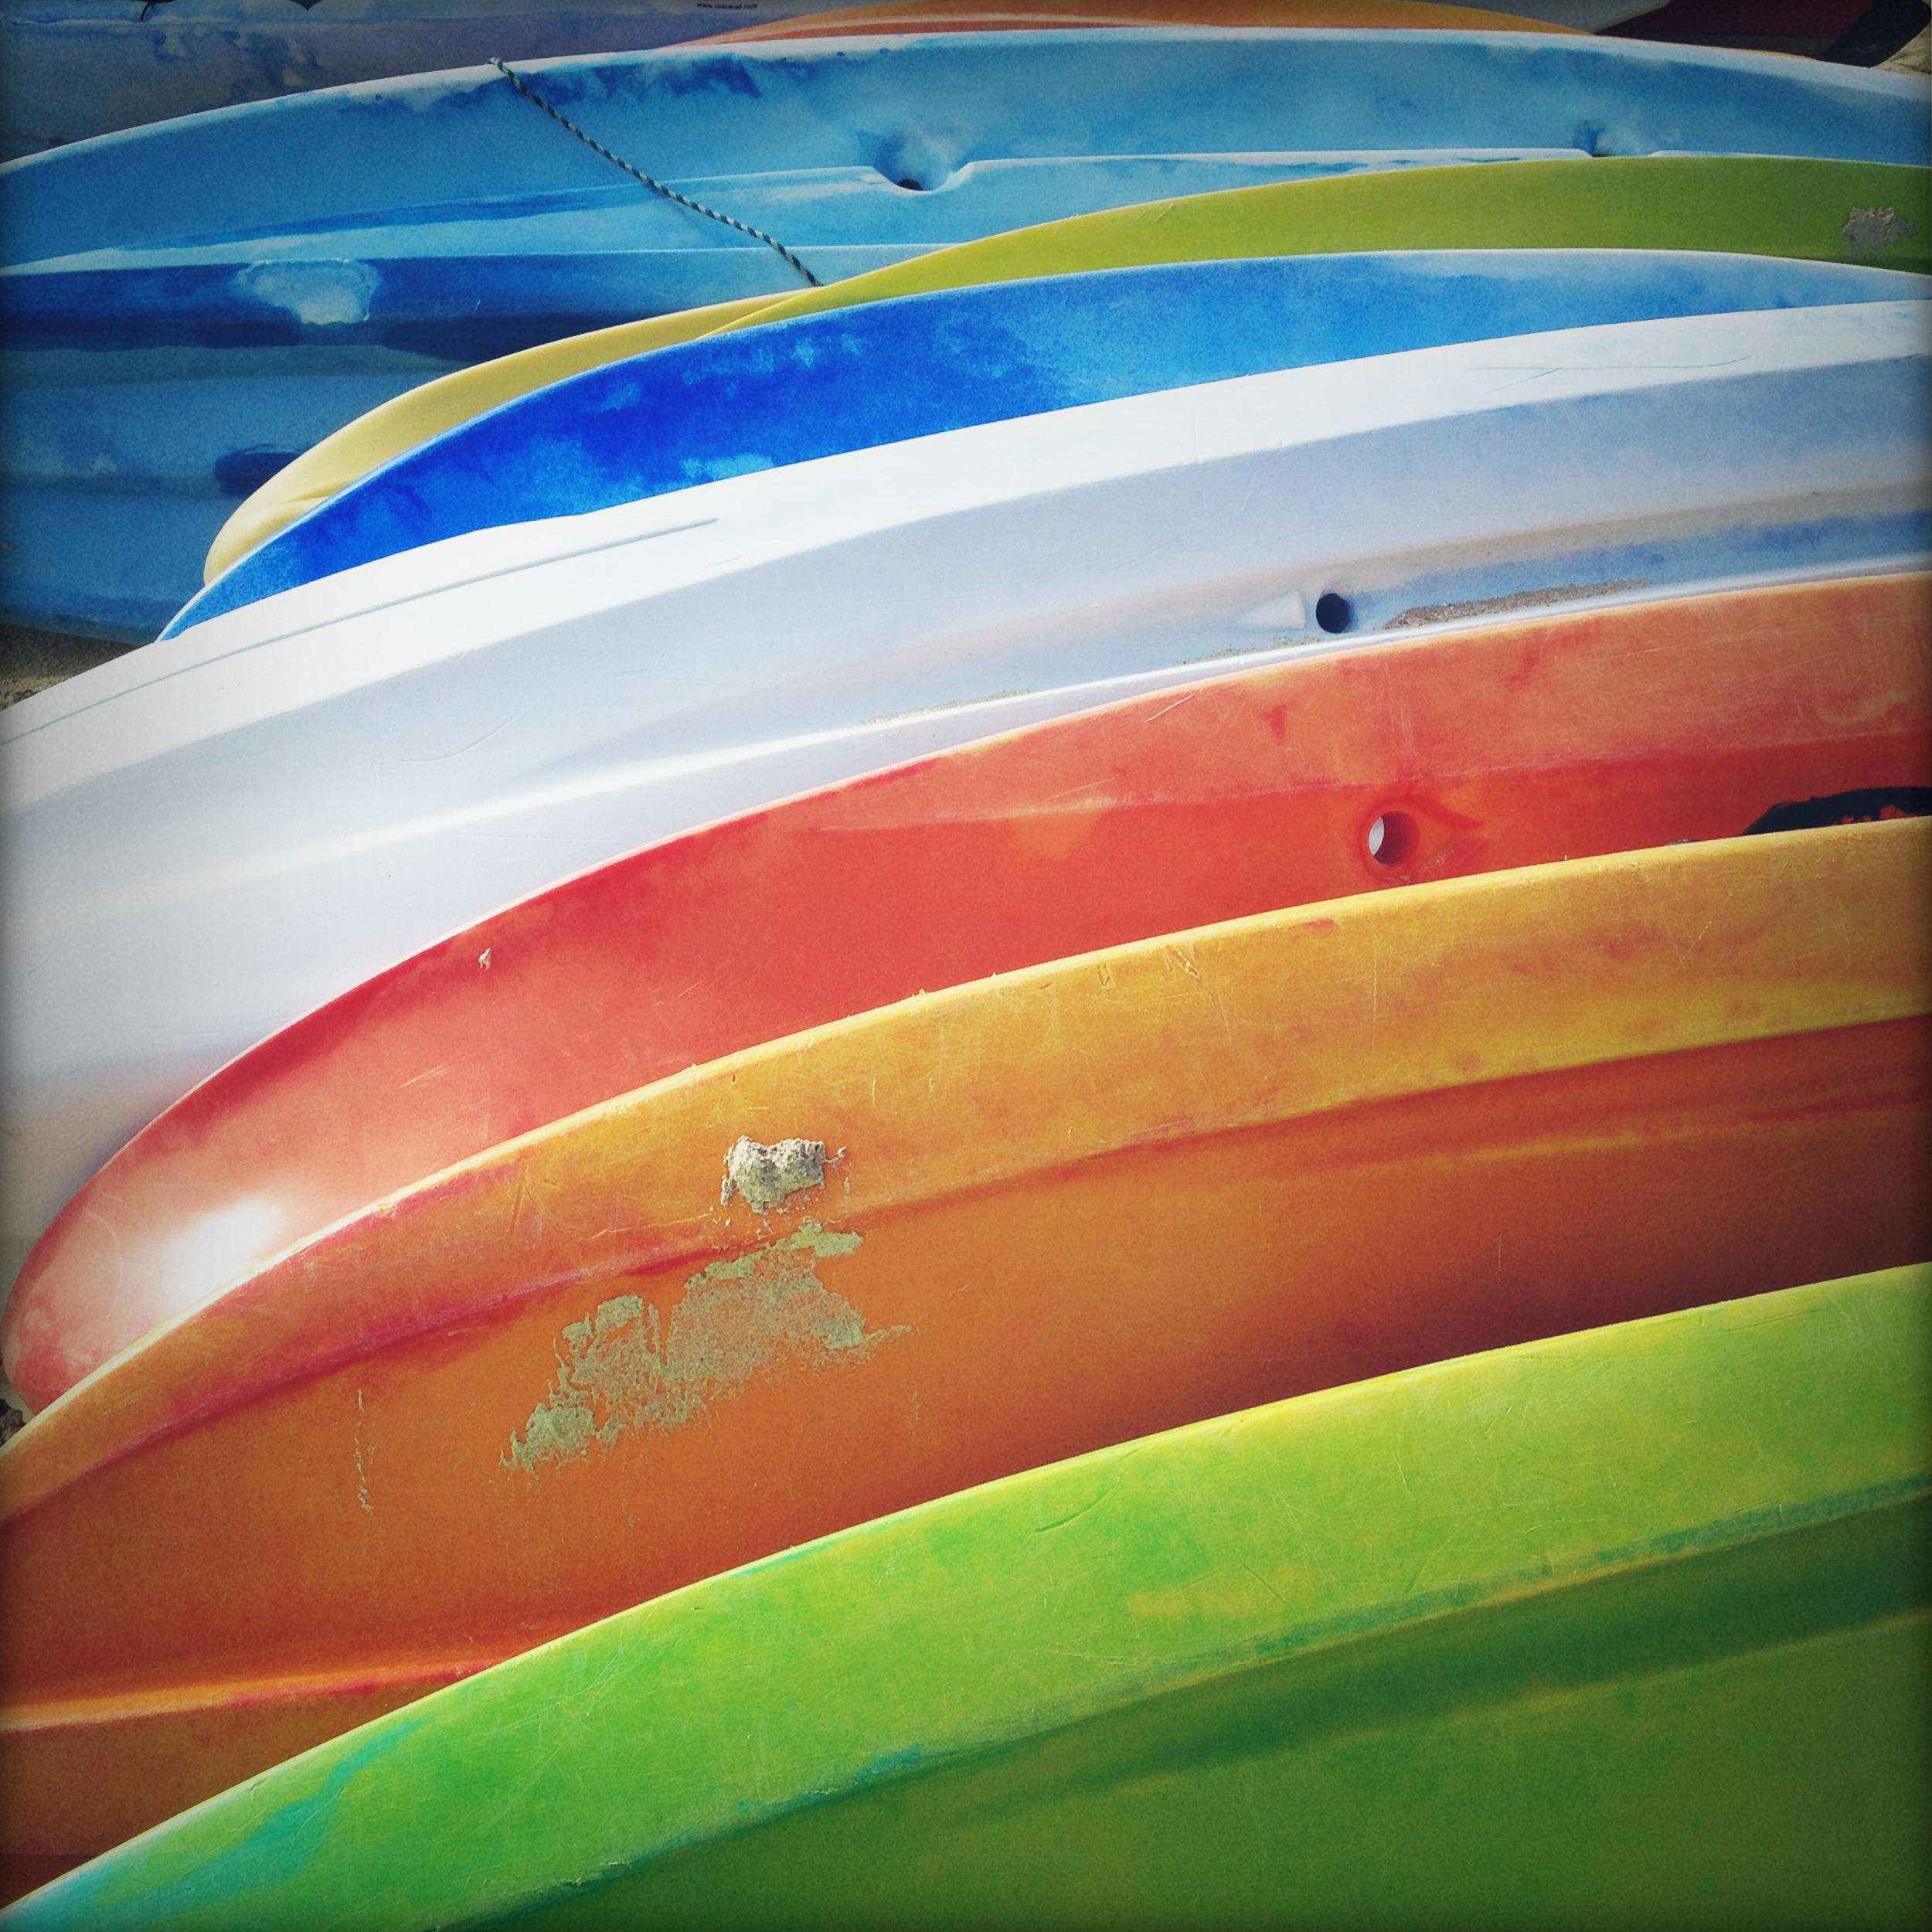 Peter Mendelson Color Photograph - "Kayak Abstract, " Contemporary Photograph, 20" x 20"